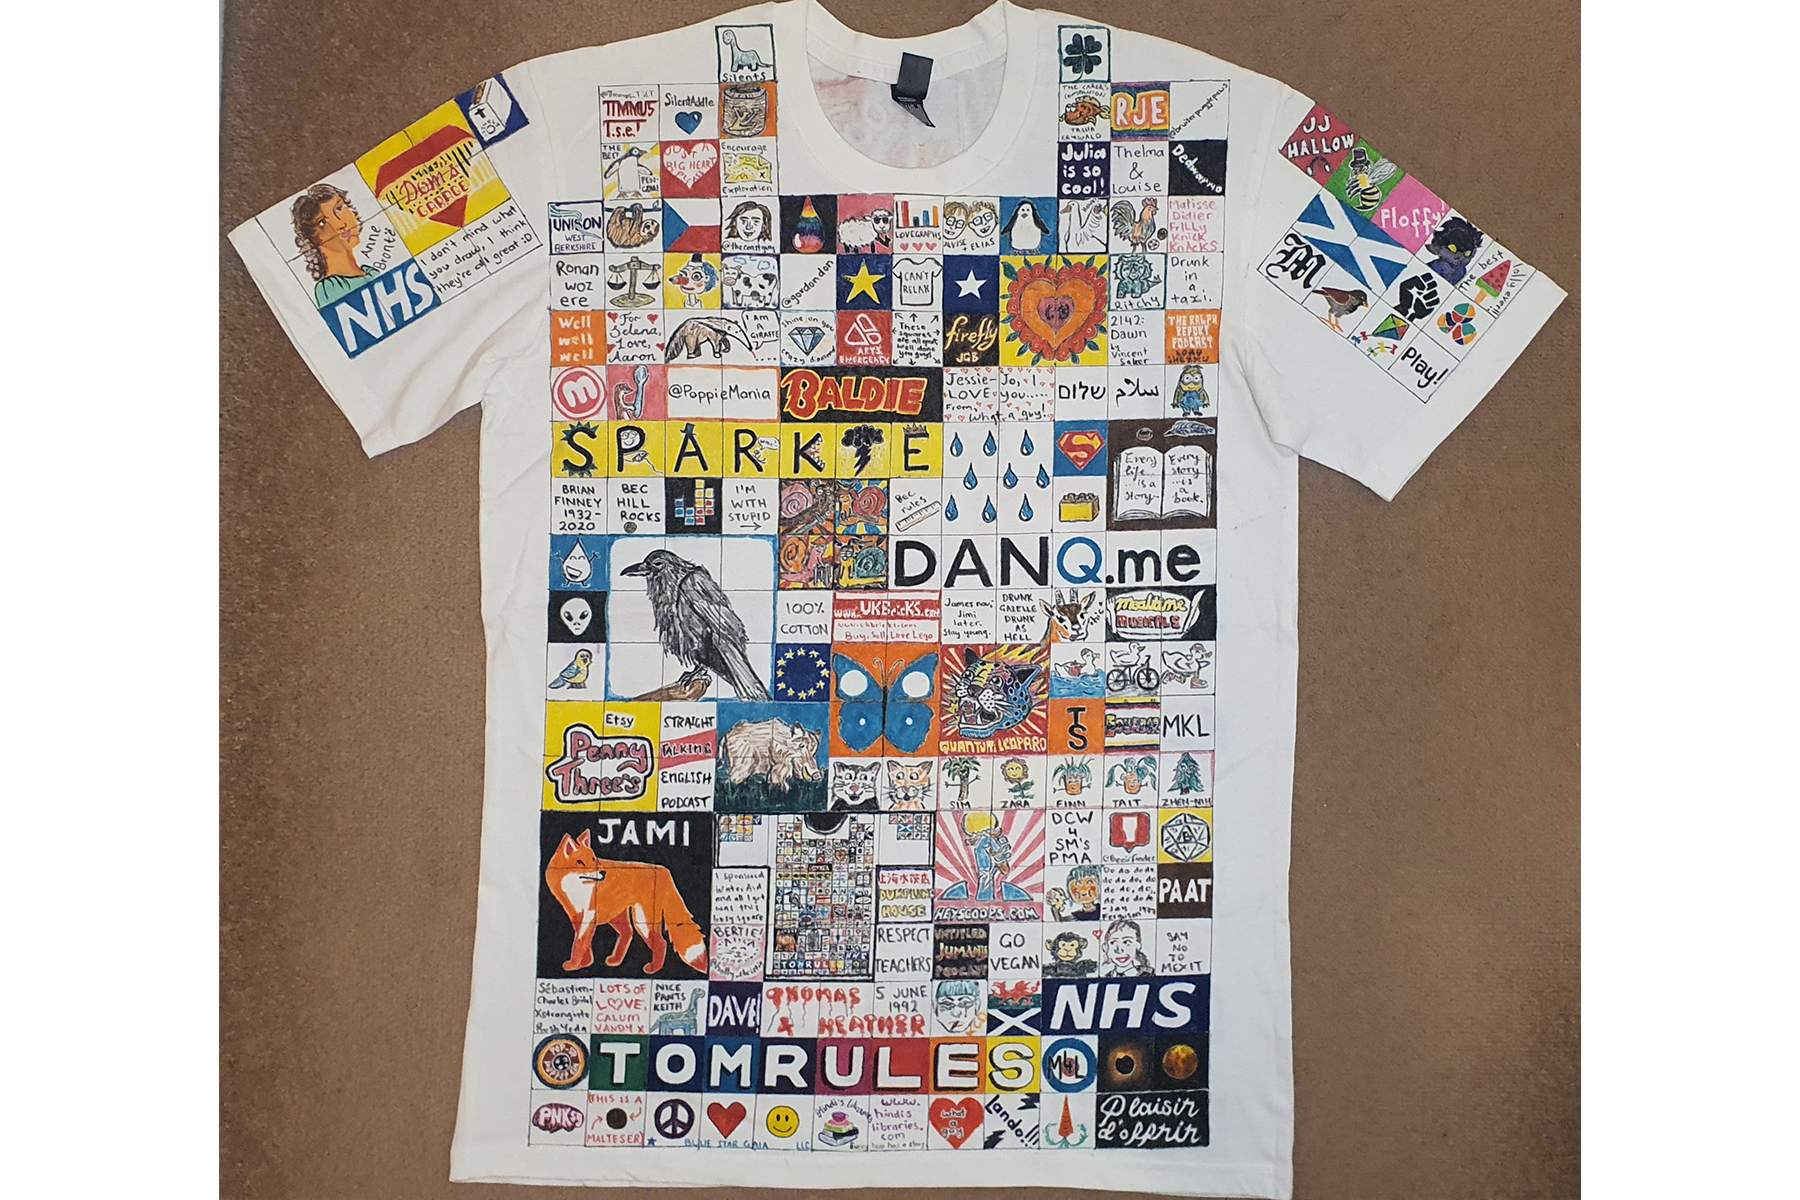 The front of a hand drawn and designed T-shirt with a patchwork of 'sponsored' images drawn on it